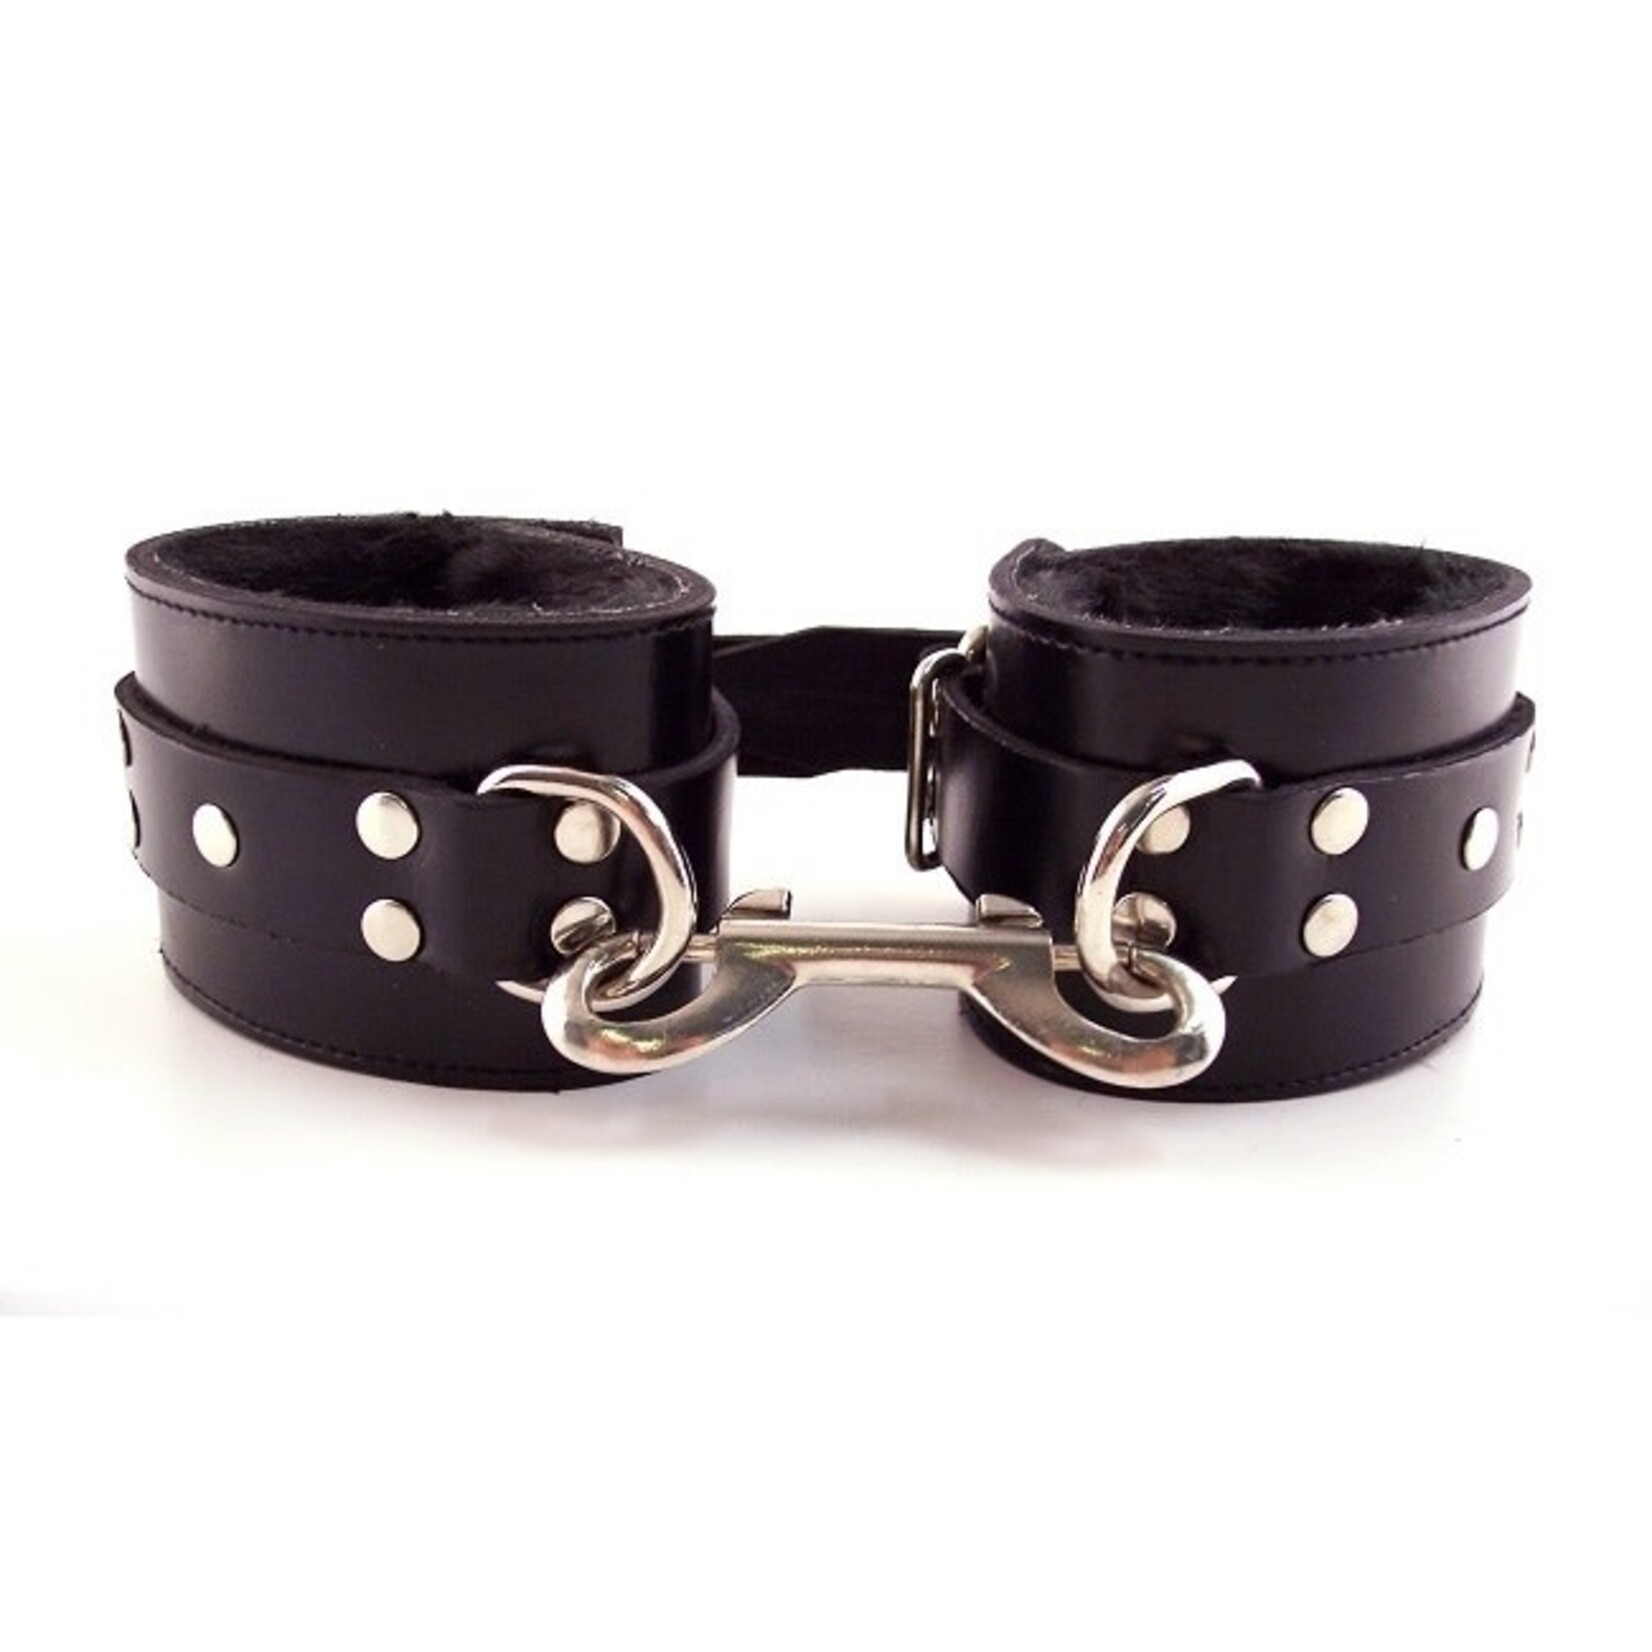 Rouge Rouge Leather and Fur Ankle Cuffs